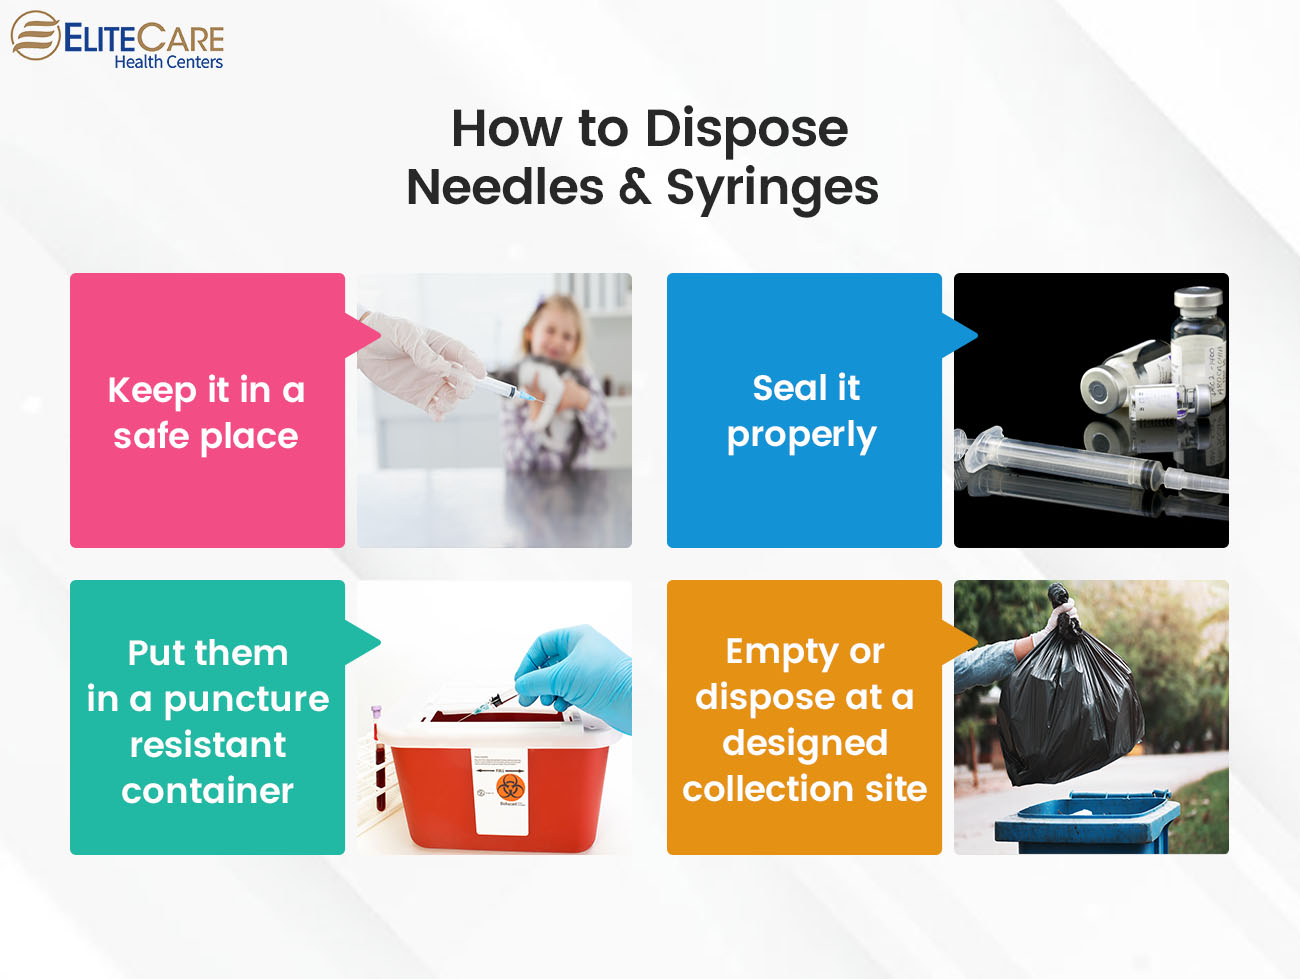 How to Dispose Needles & Syringes